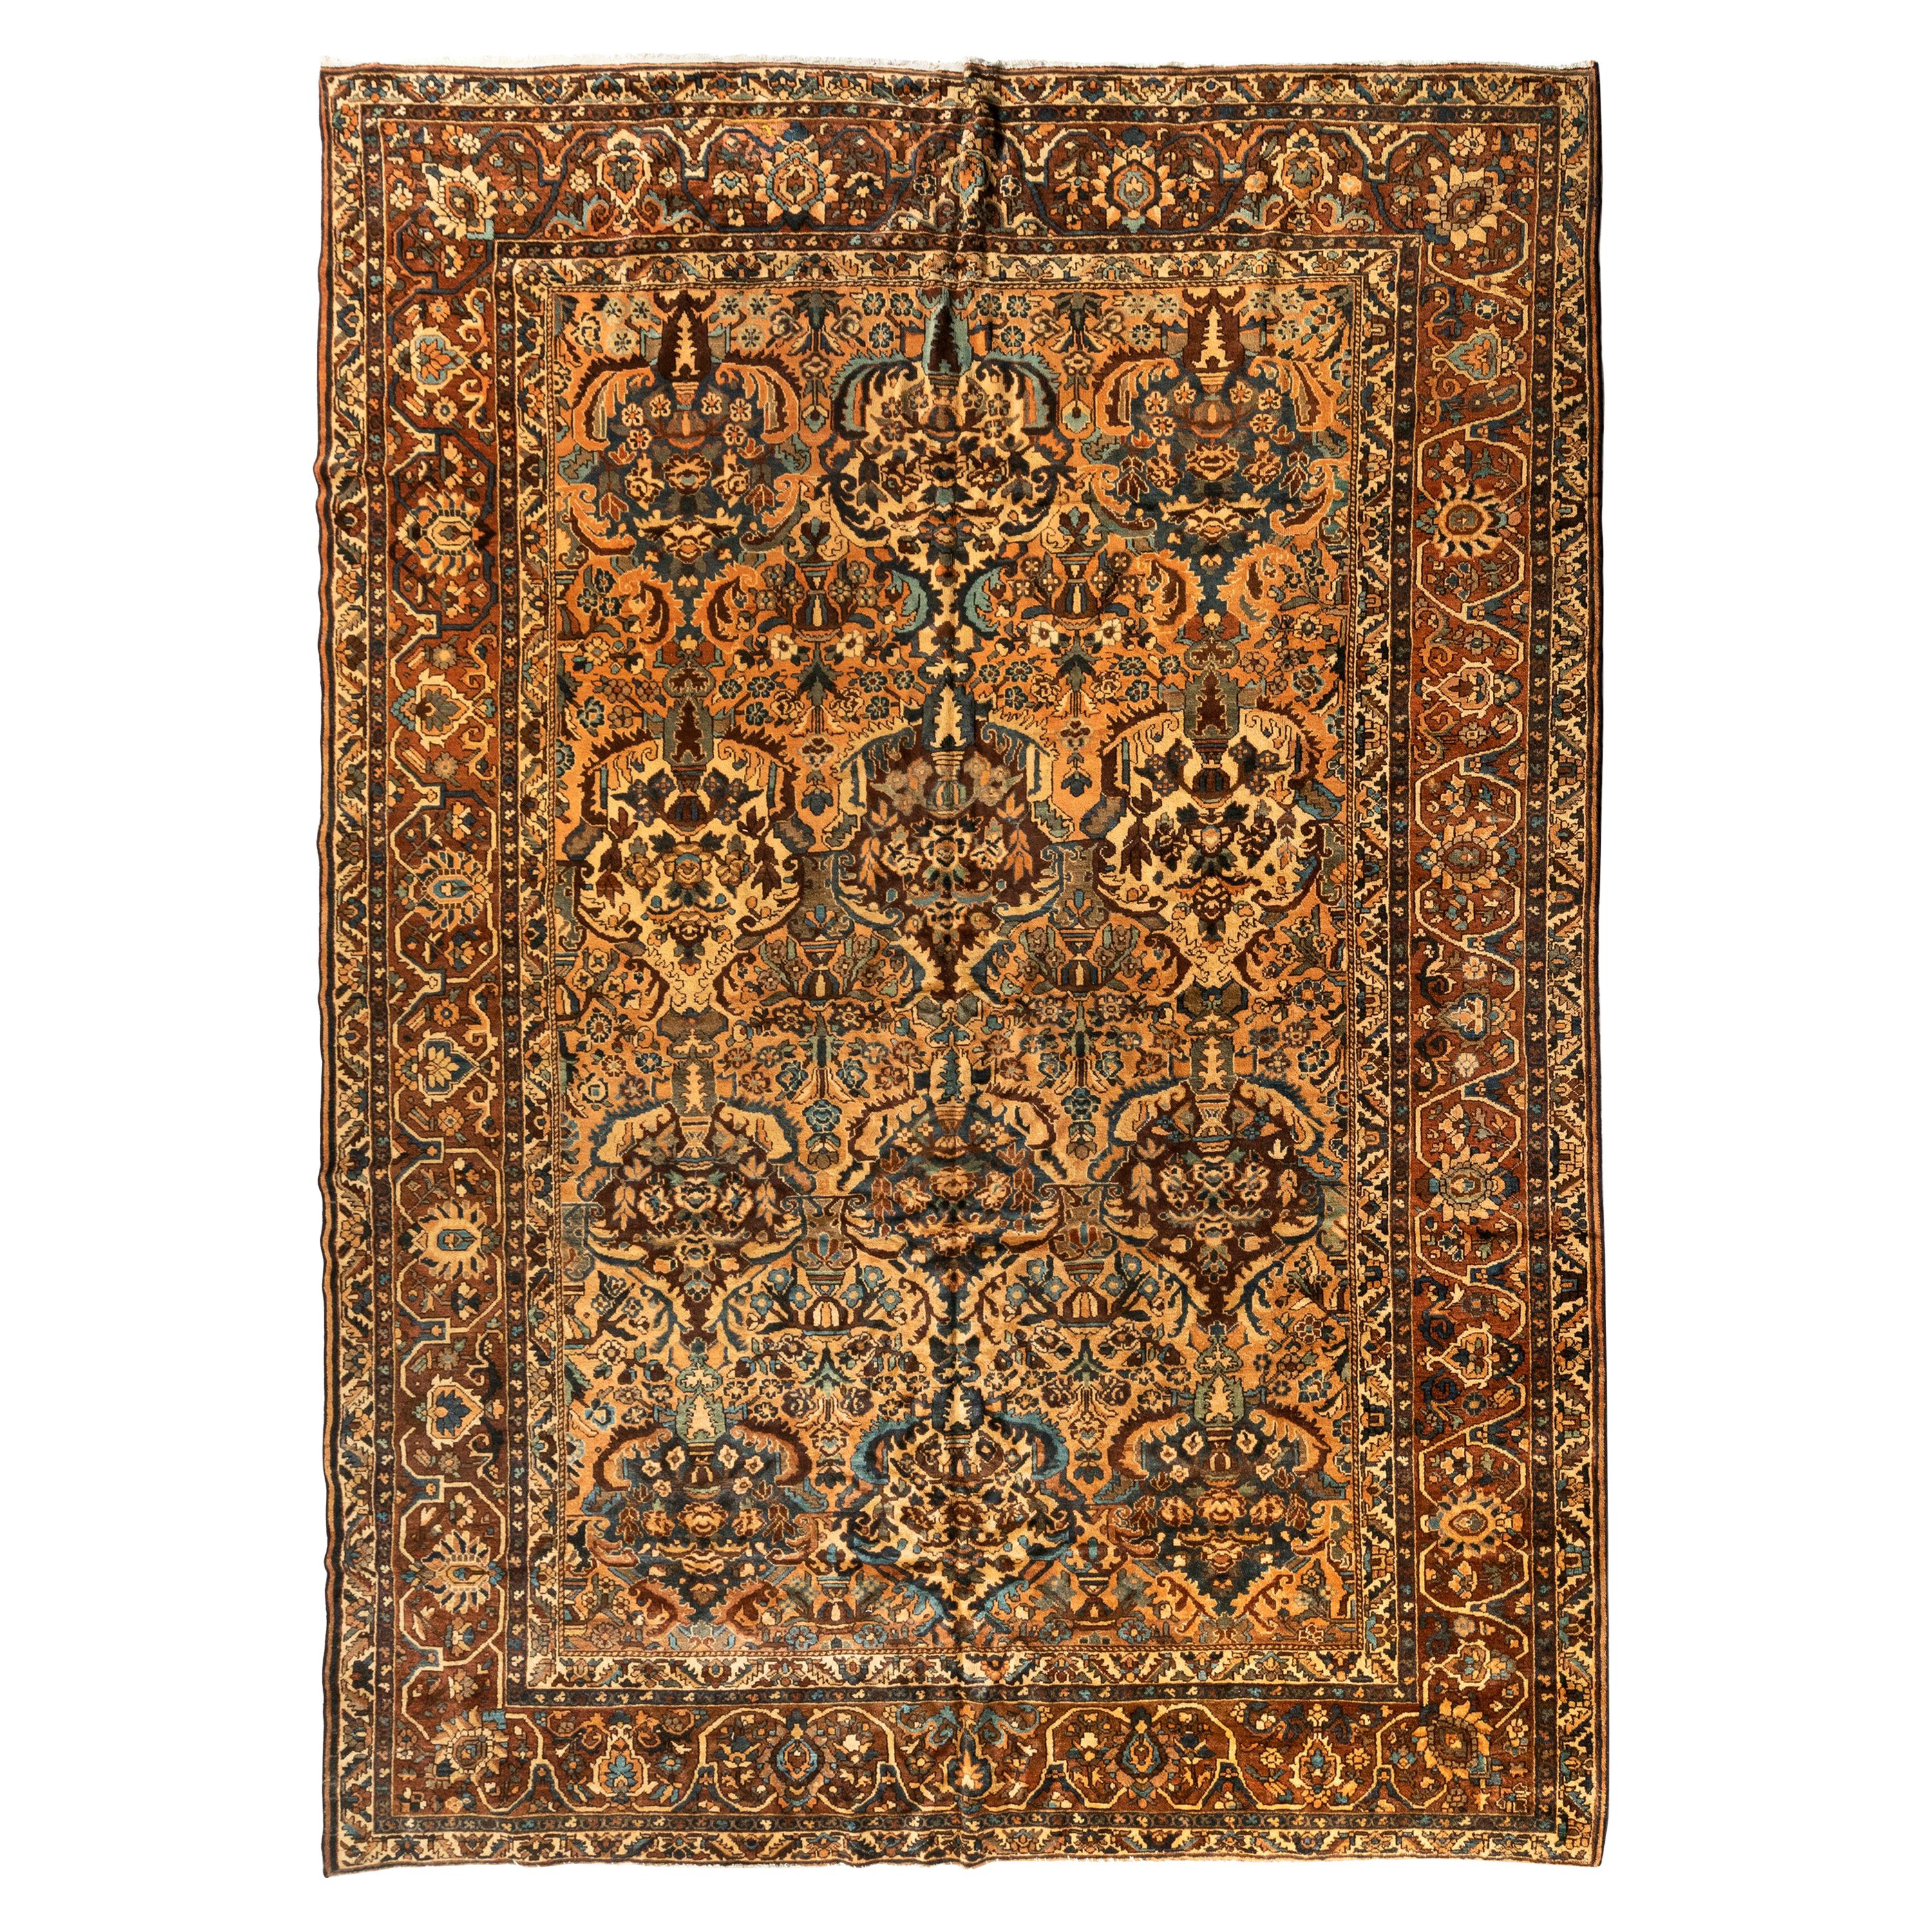 Antique Oversize Large Persian Brown and Ivory Bakhtiari Rug, circa 1930s-1940s